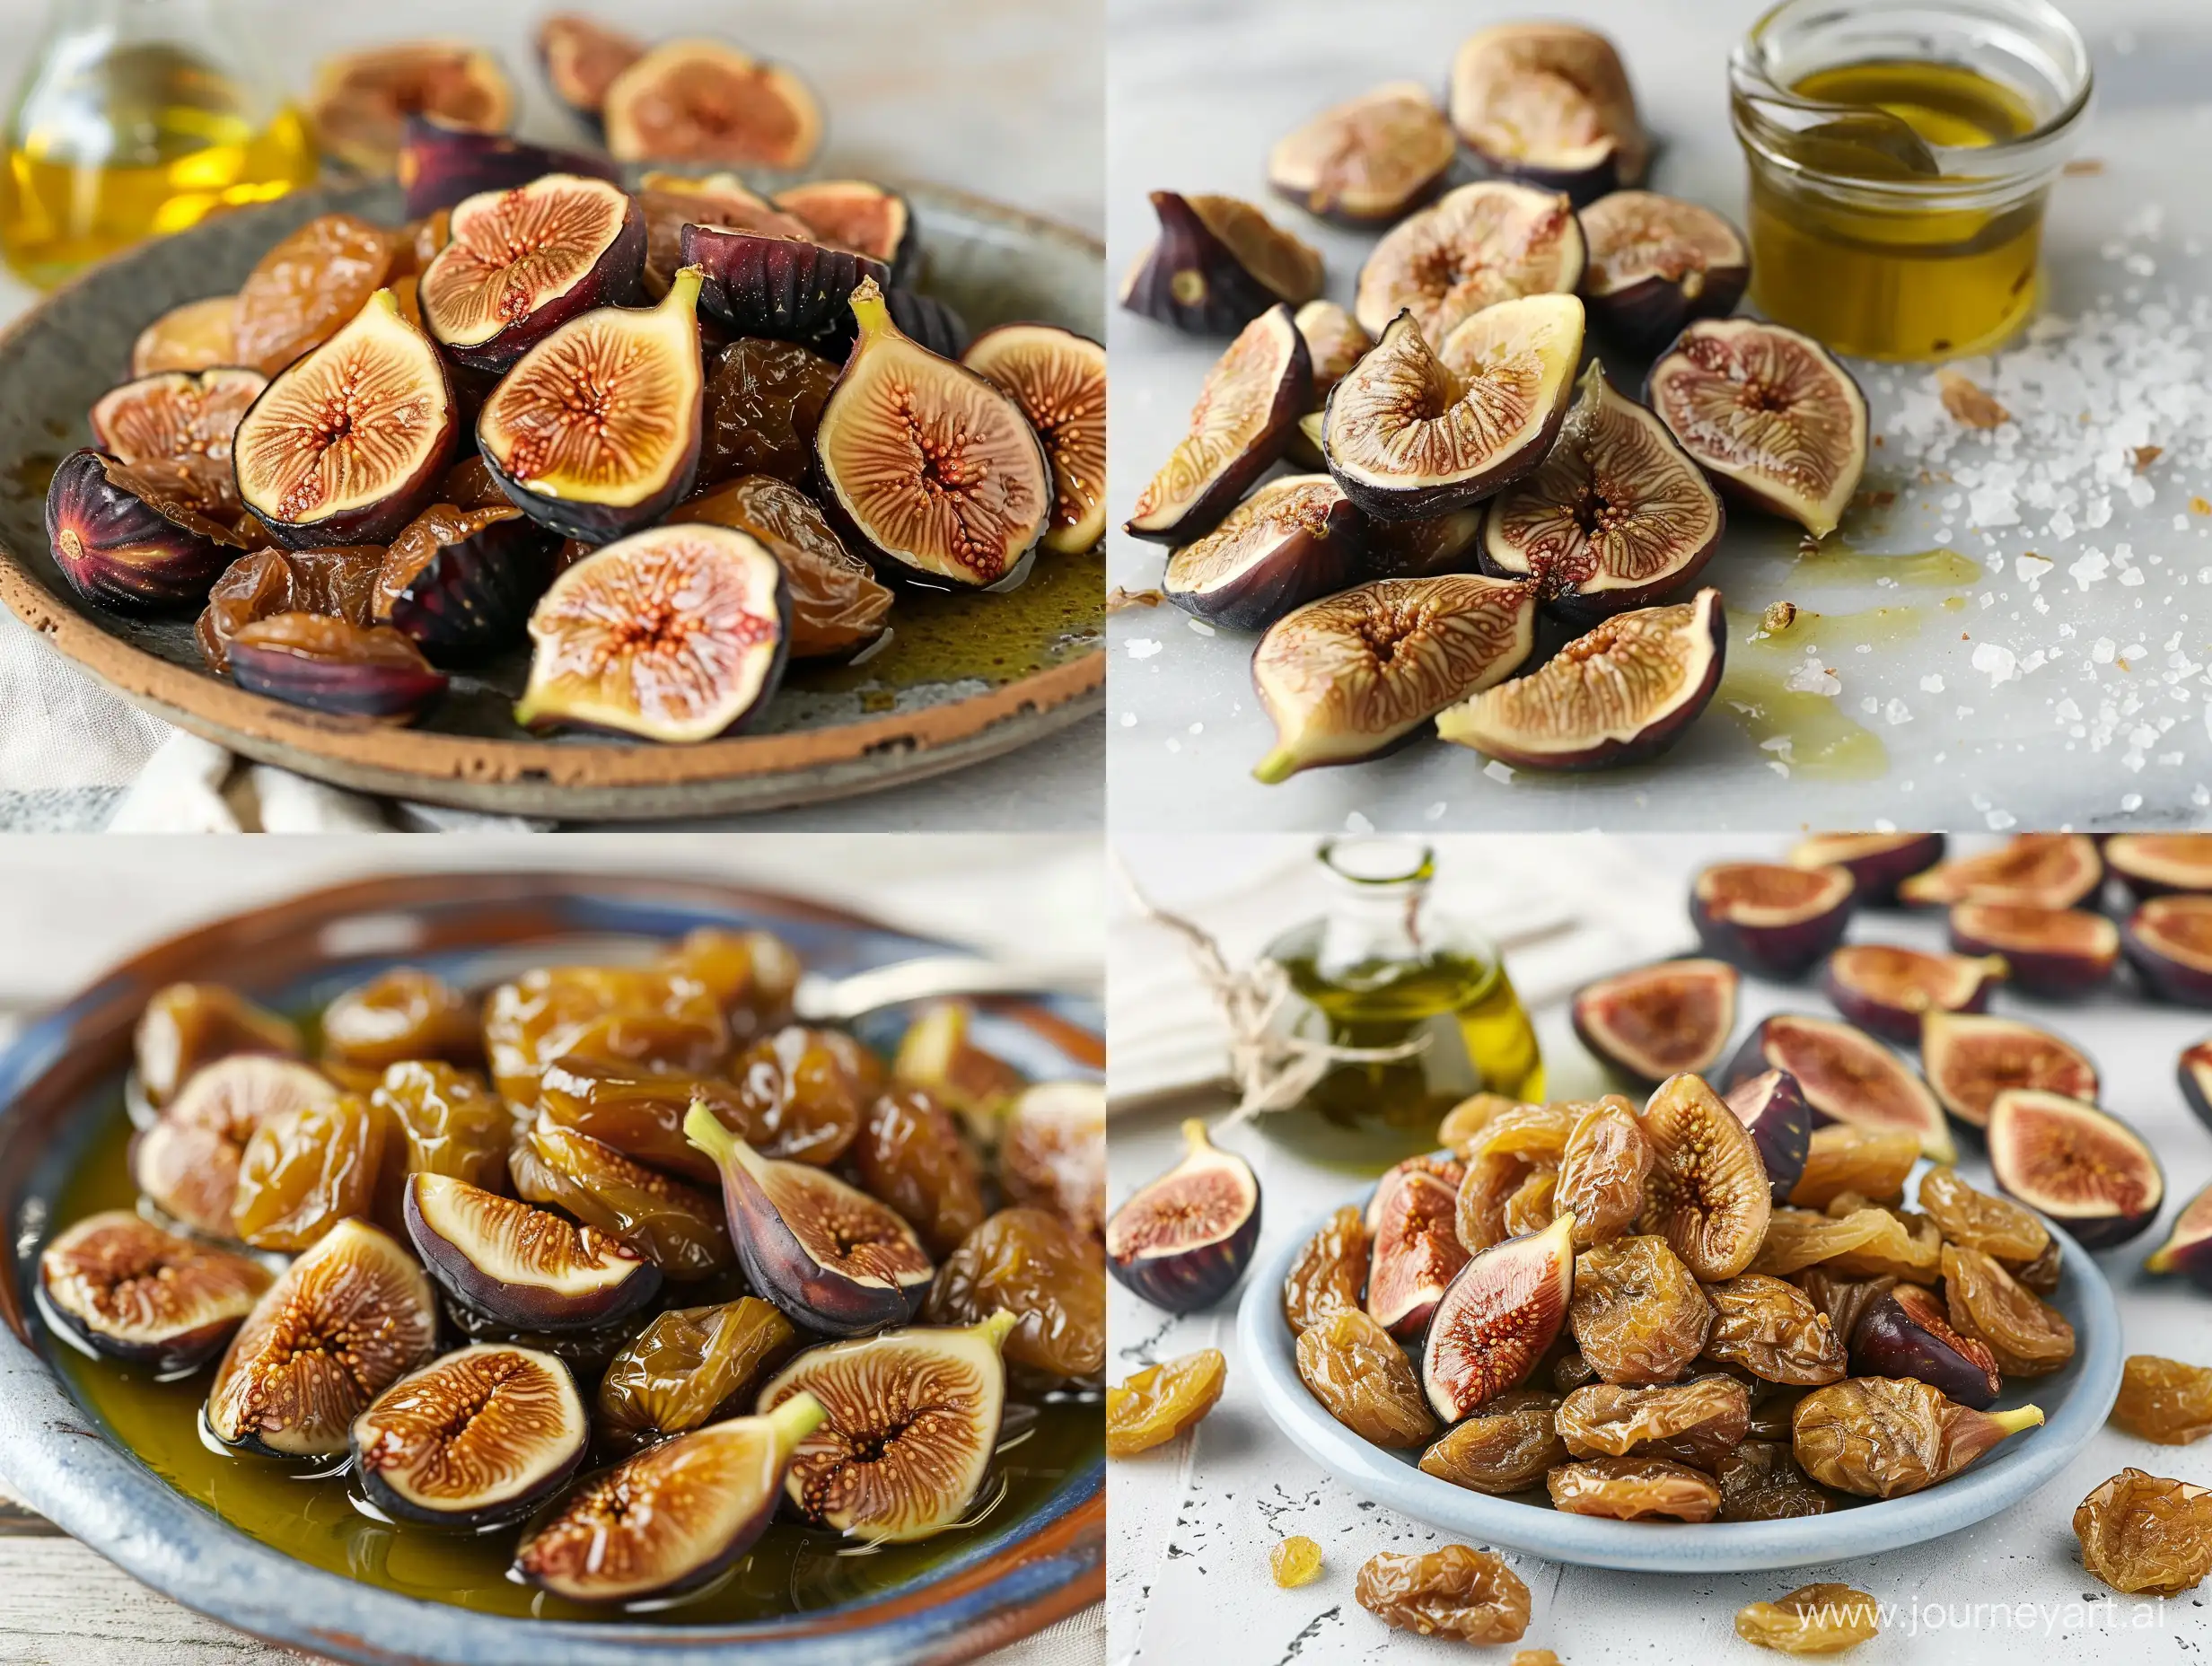 Organic-Dried-Figs-with-Olive-Oil-A-Delectable-Mediterranean-Delight